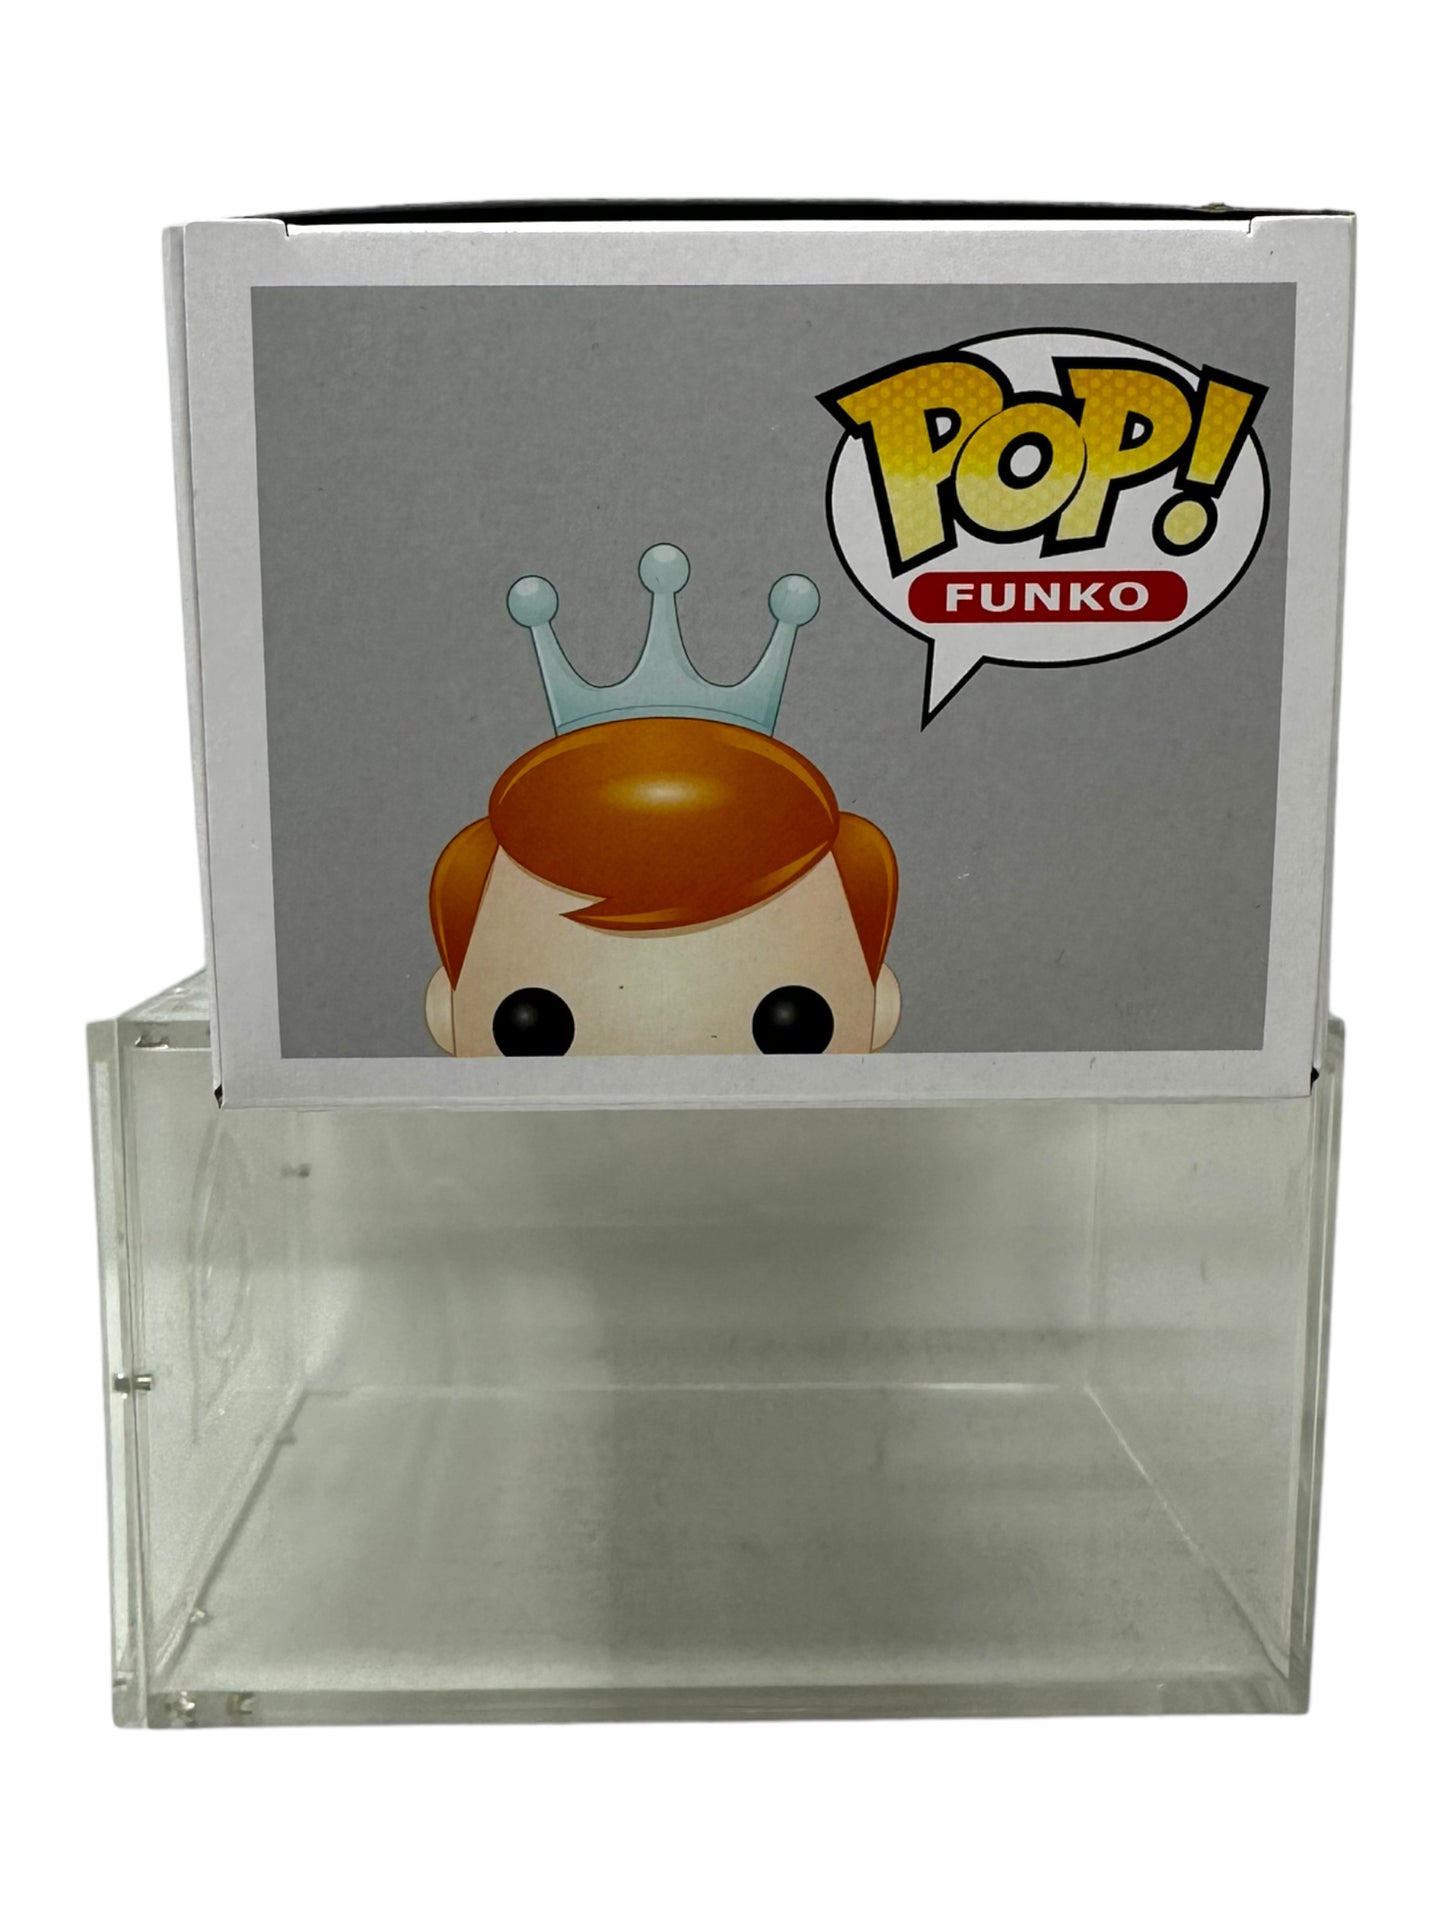 Sold 9/25 2016 SDCC Freddy Funko Willy Wonka LE500